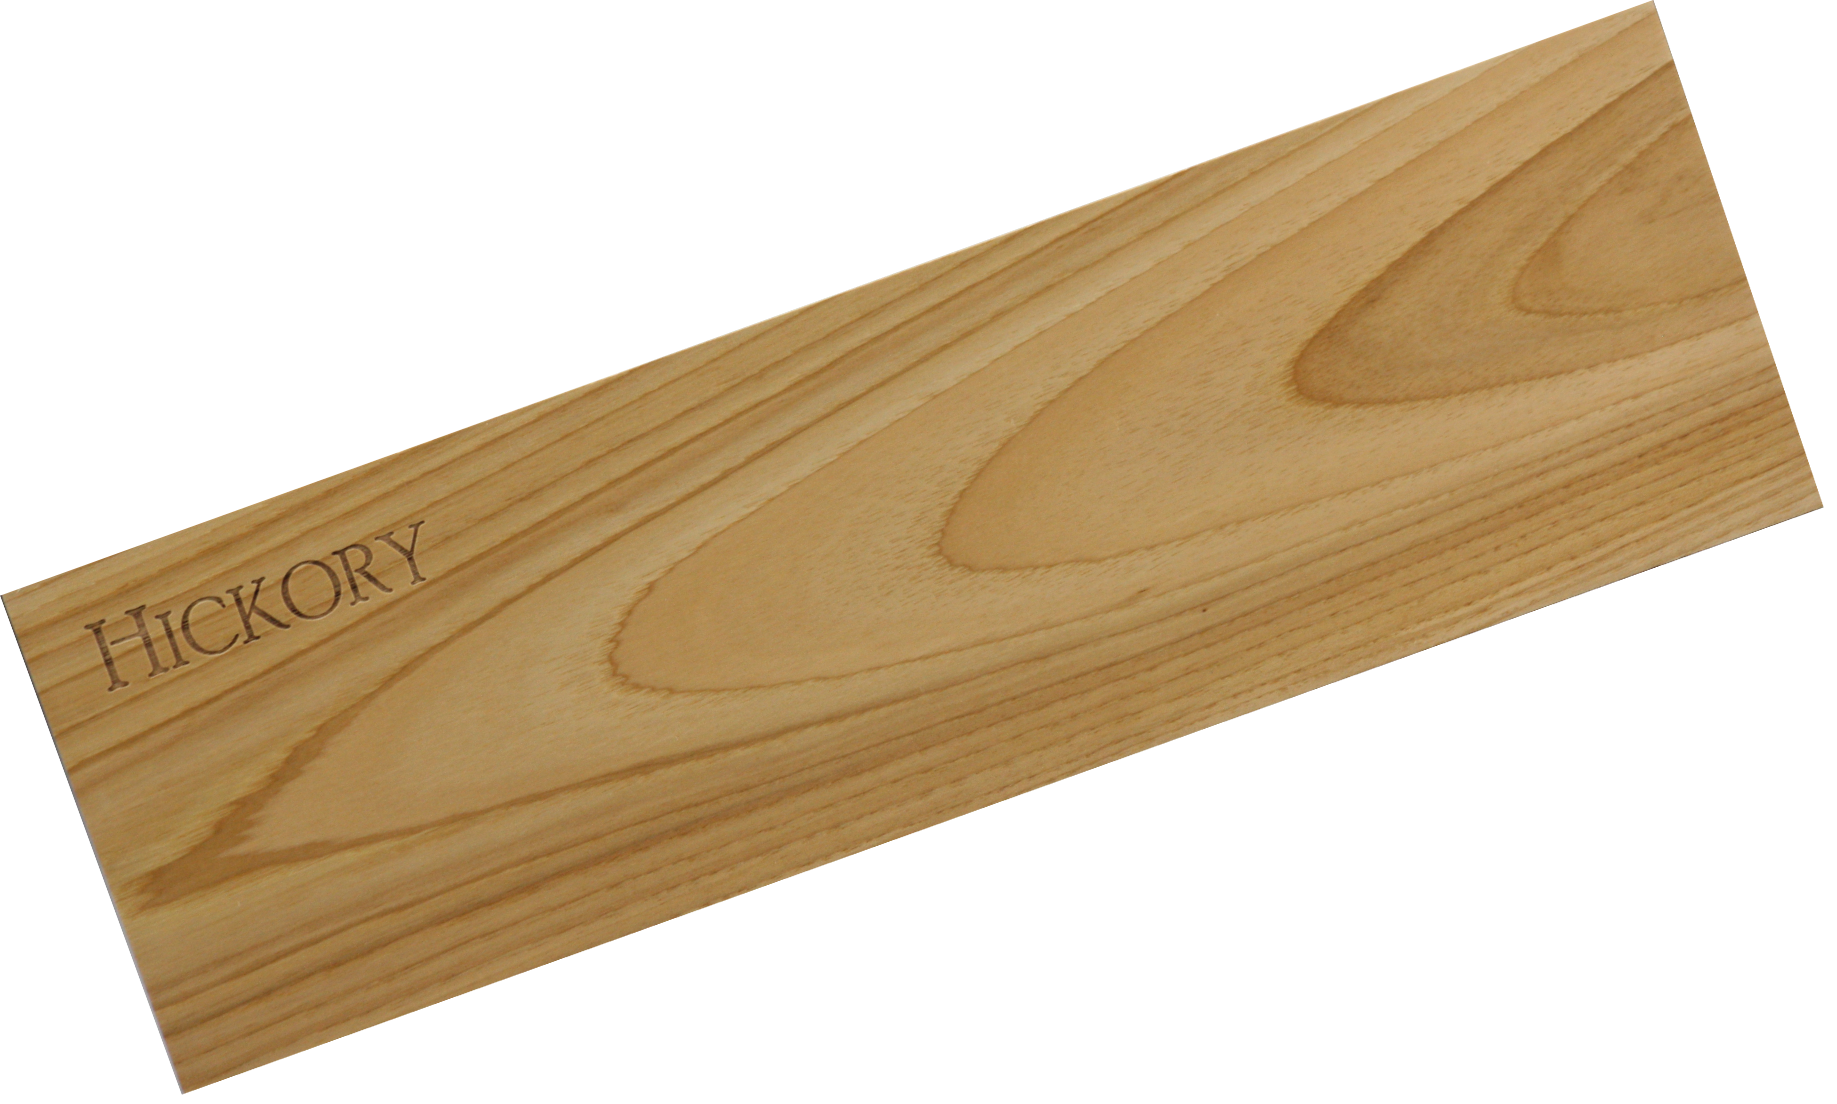 Wood Strip (Red Oak / Hickory) 12" x 24" x  (1/16", 3/32", 1/8", 3/16" or 1/4") - LSTX53-Red Oak-Hickory-O-1/8-F